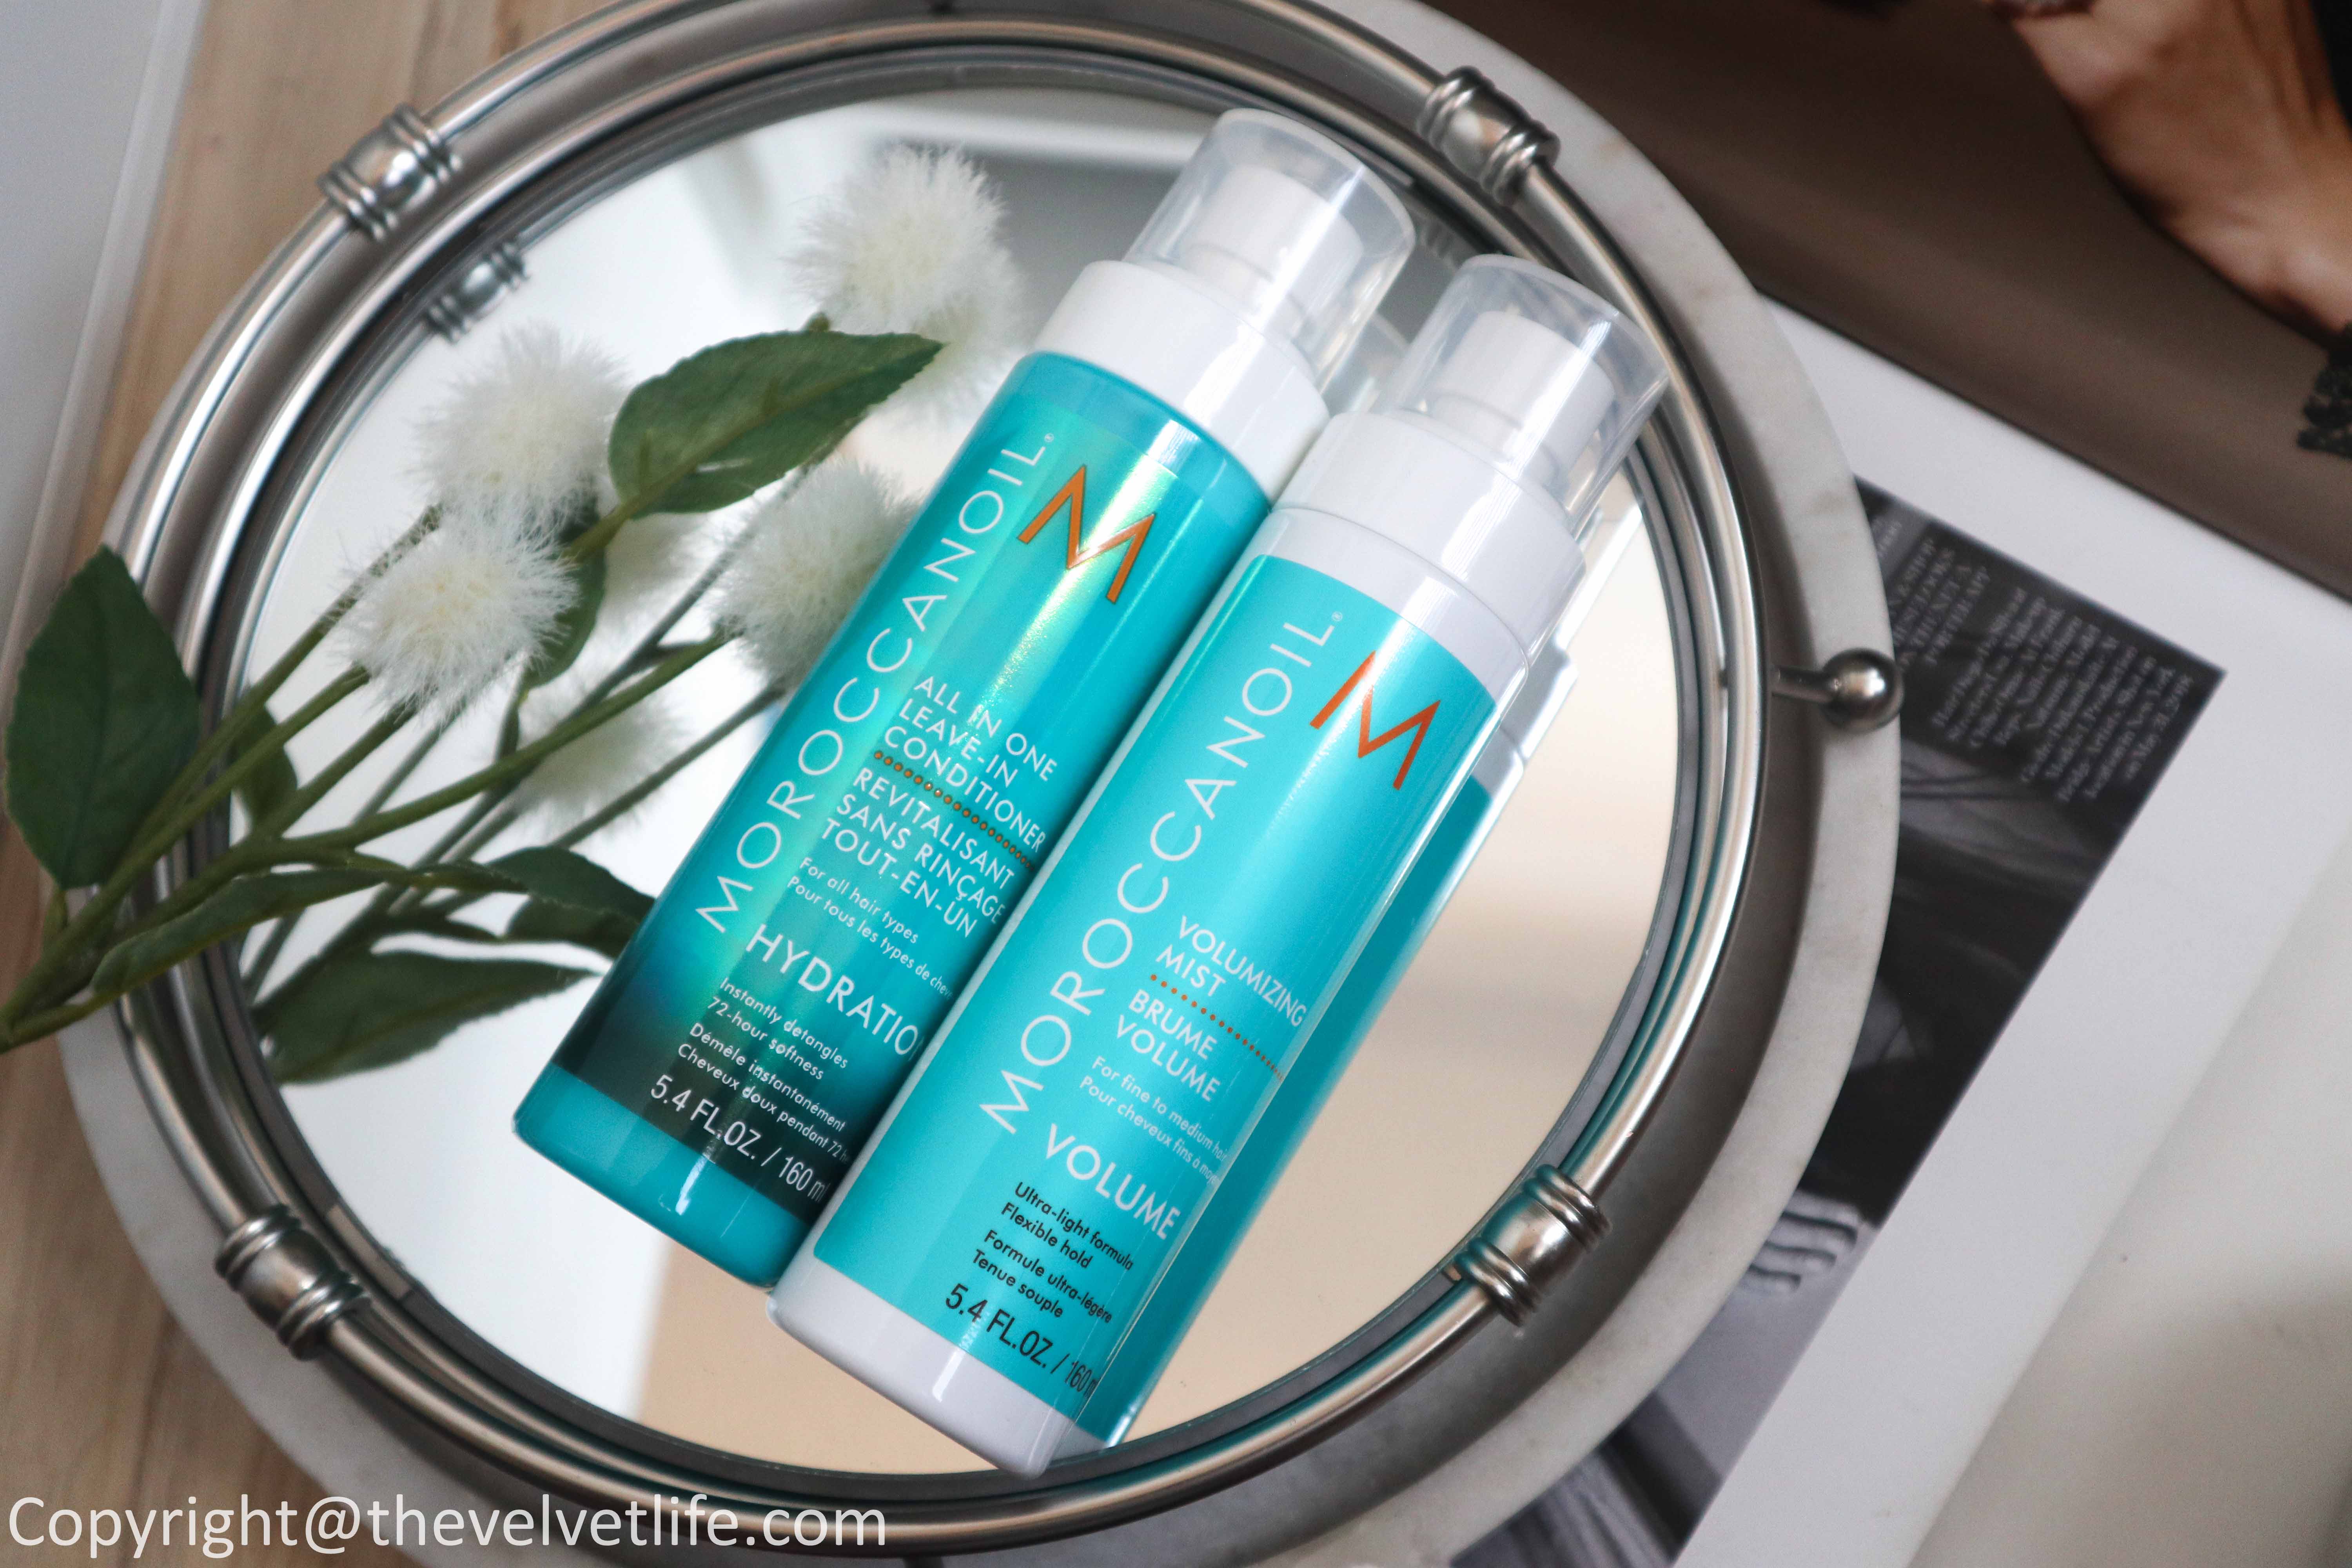 New MoroccanOil All In One Leave-In Conditioner and MoroccanOil Volumizing Mist review